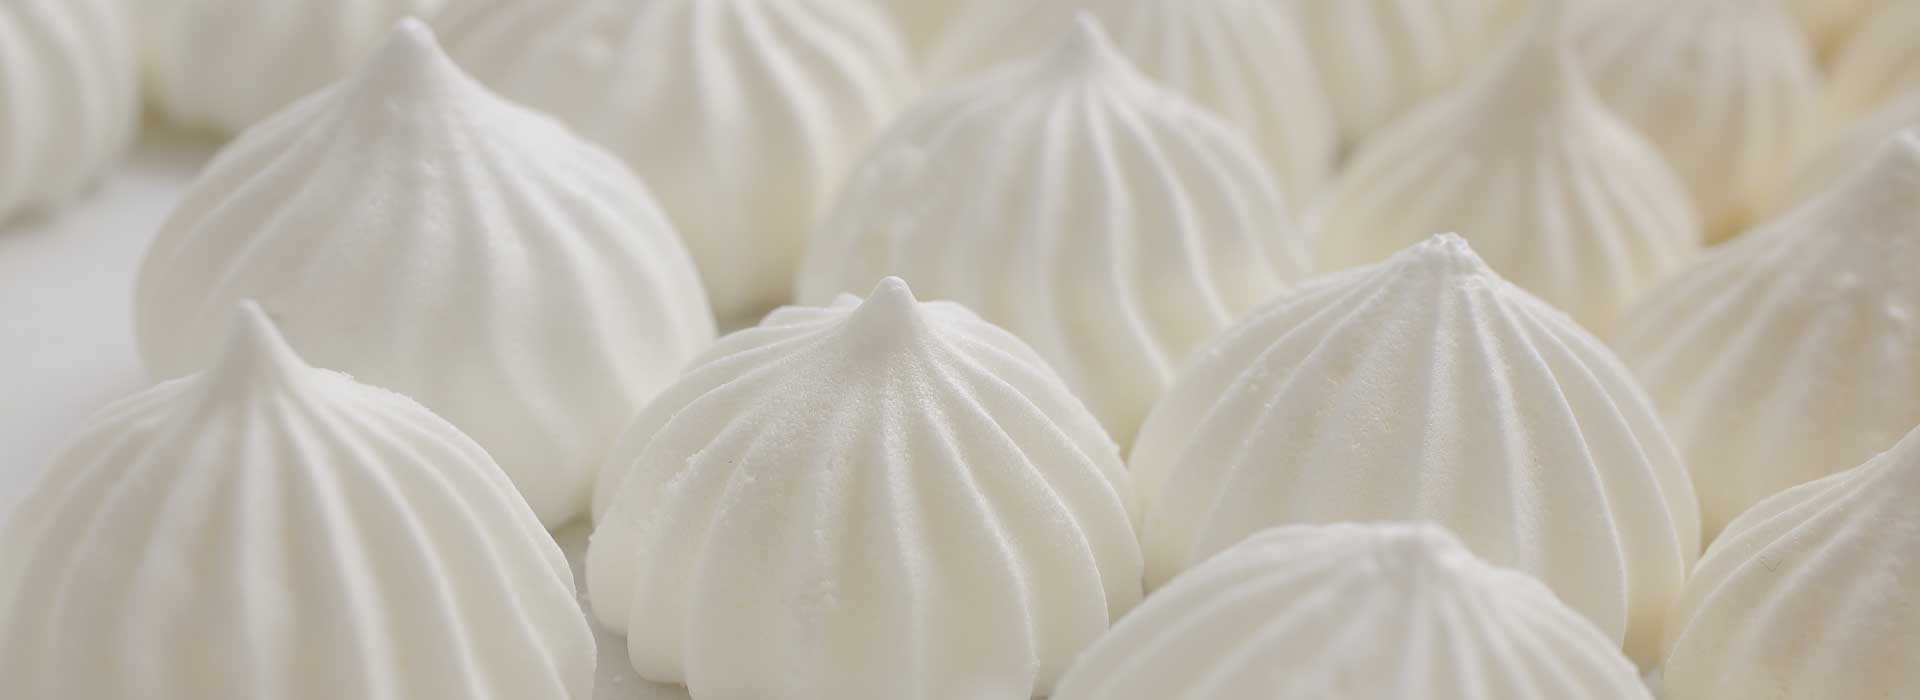 FRENCH MERINGUE (COLD)